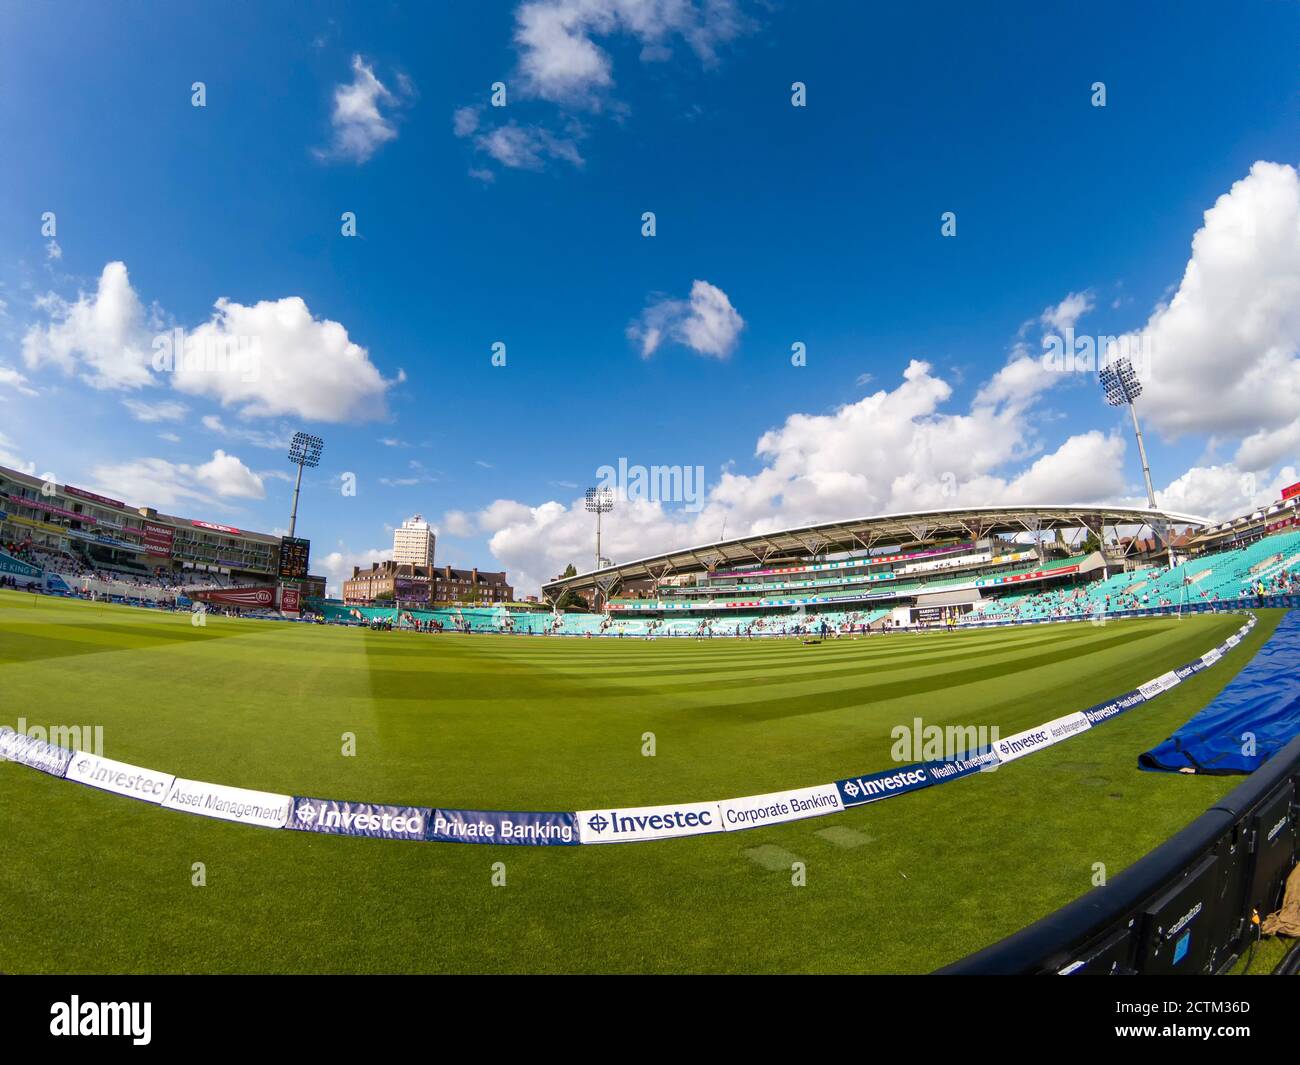 A cricket match at the Oval in London, UK Stock Photo